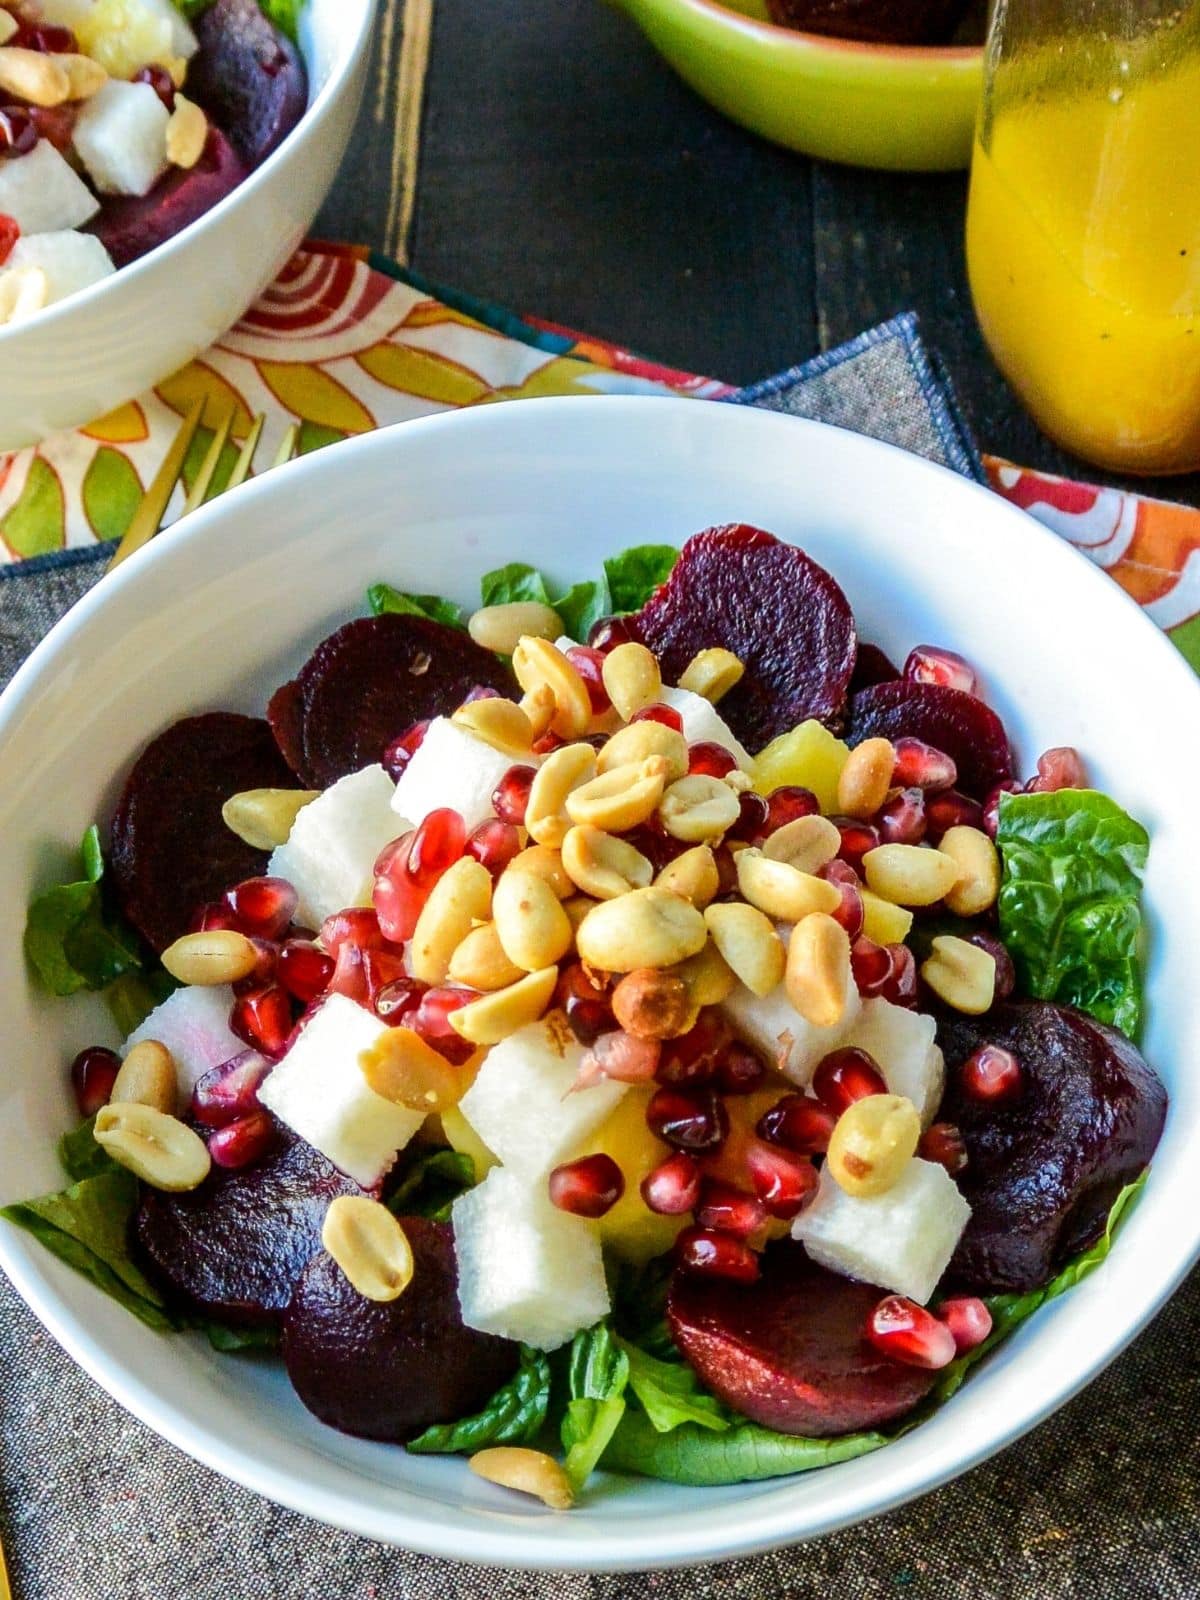 Close up of salad topped with beets, pineapple, jicama, and peanuts.